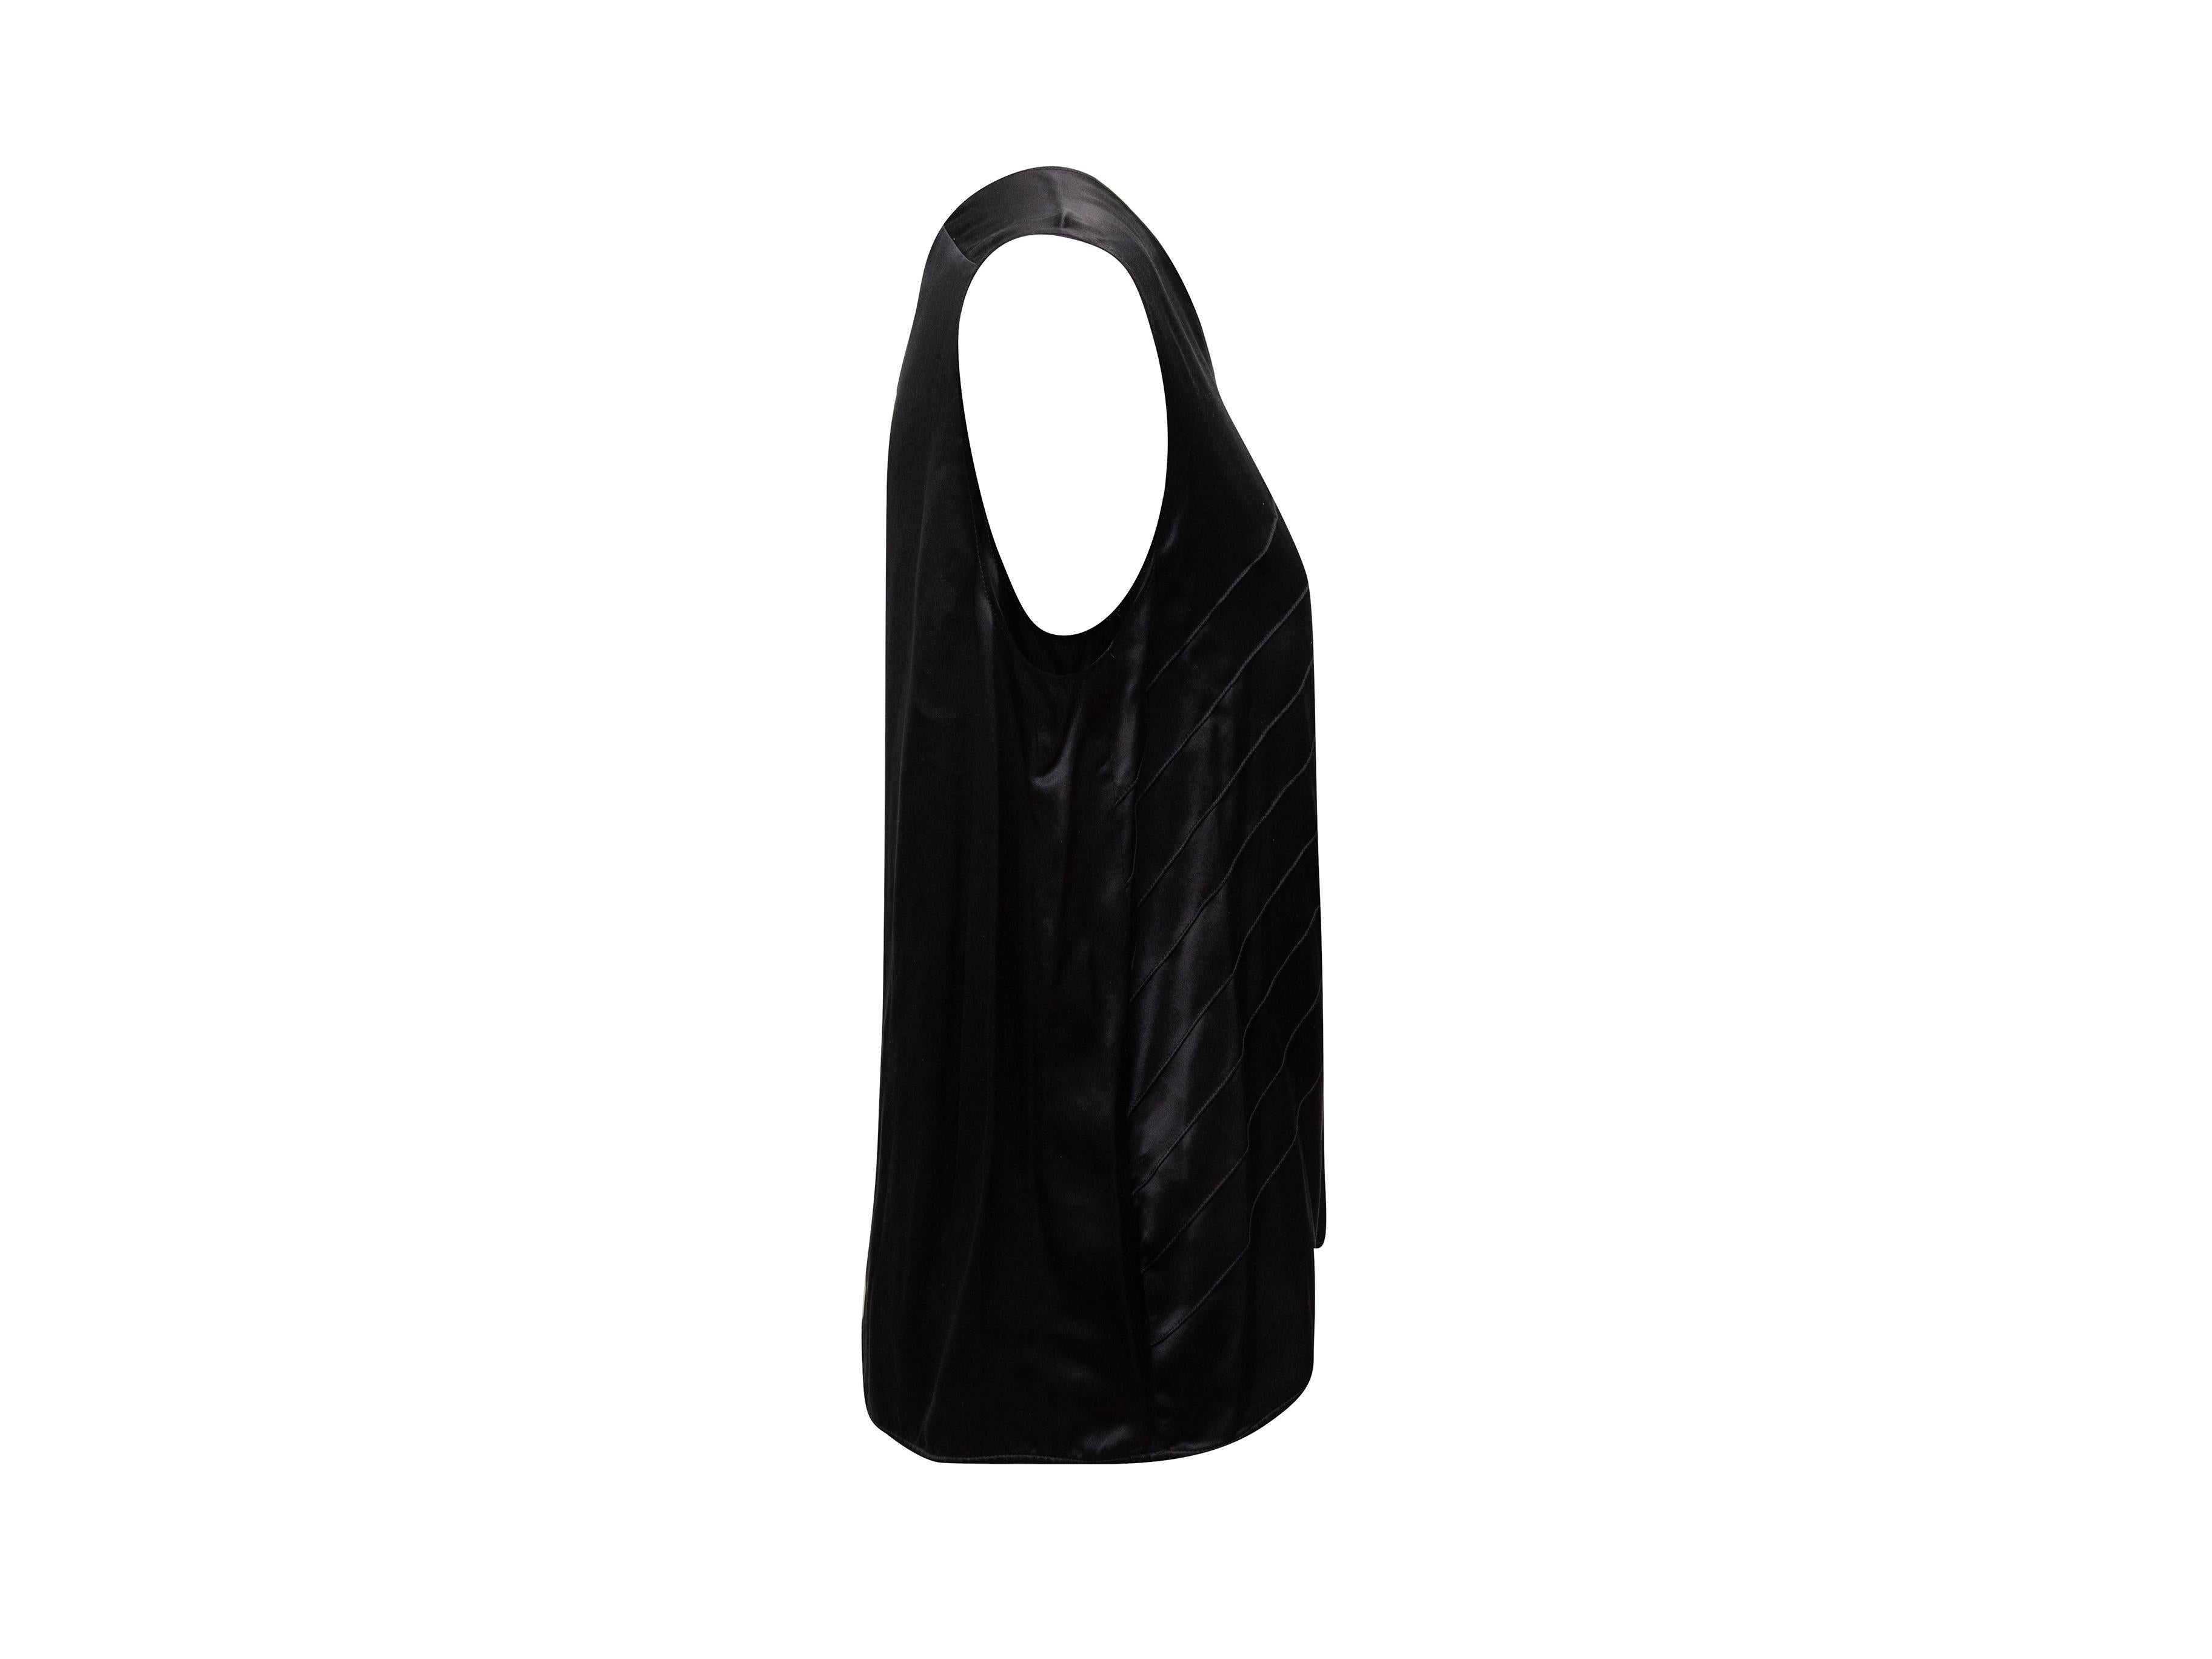 Product details: Black sleeveless silk top by Chanel. From the Fall 2008 Collec tion. V-neck. 22